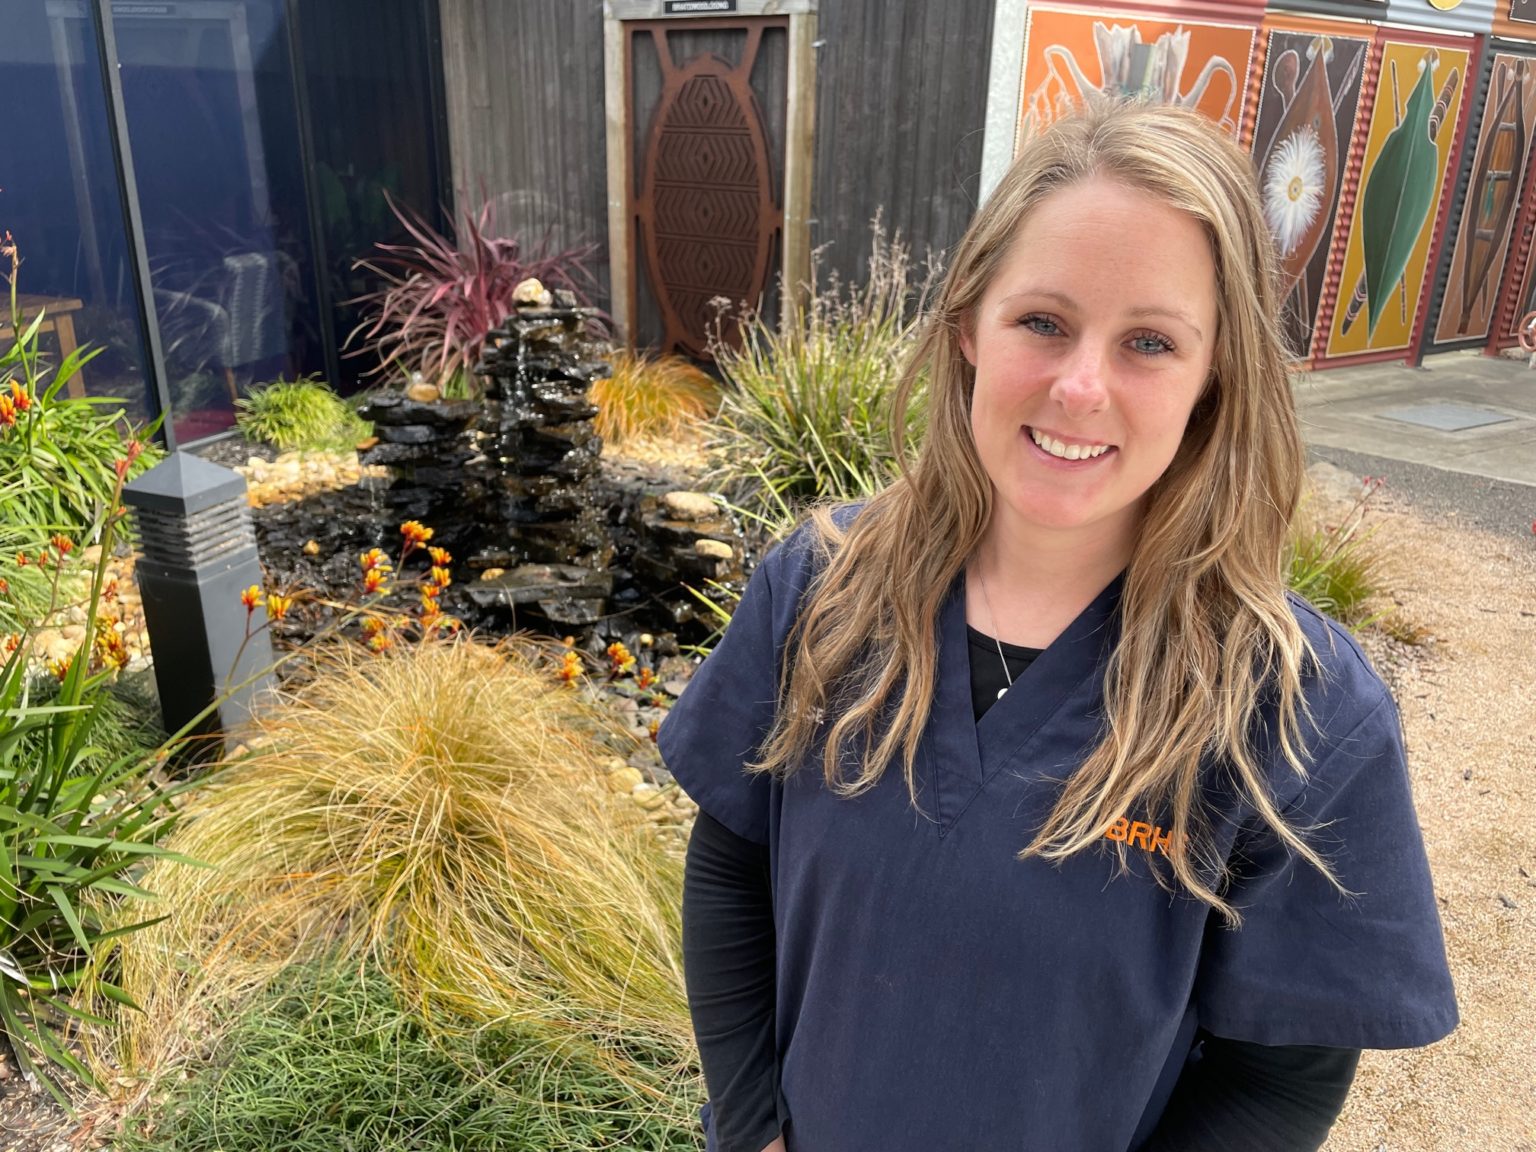 Ashley Leach is wearing a dark blue BRHS uniform and is standing in front of a garden with a water feature outside the BRHS Oncology and Dialysis Unit.